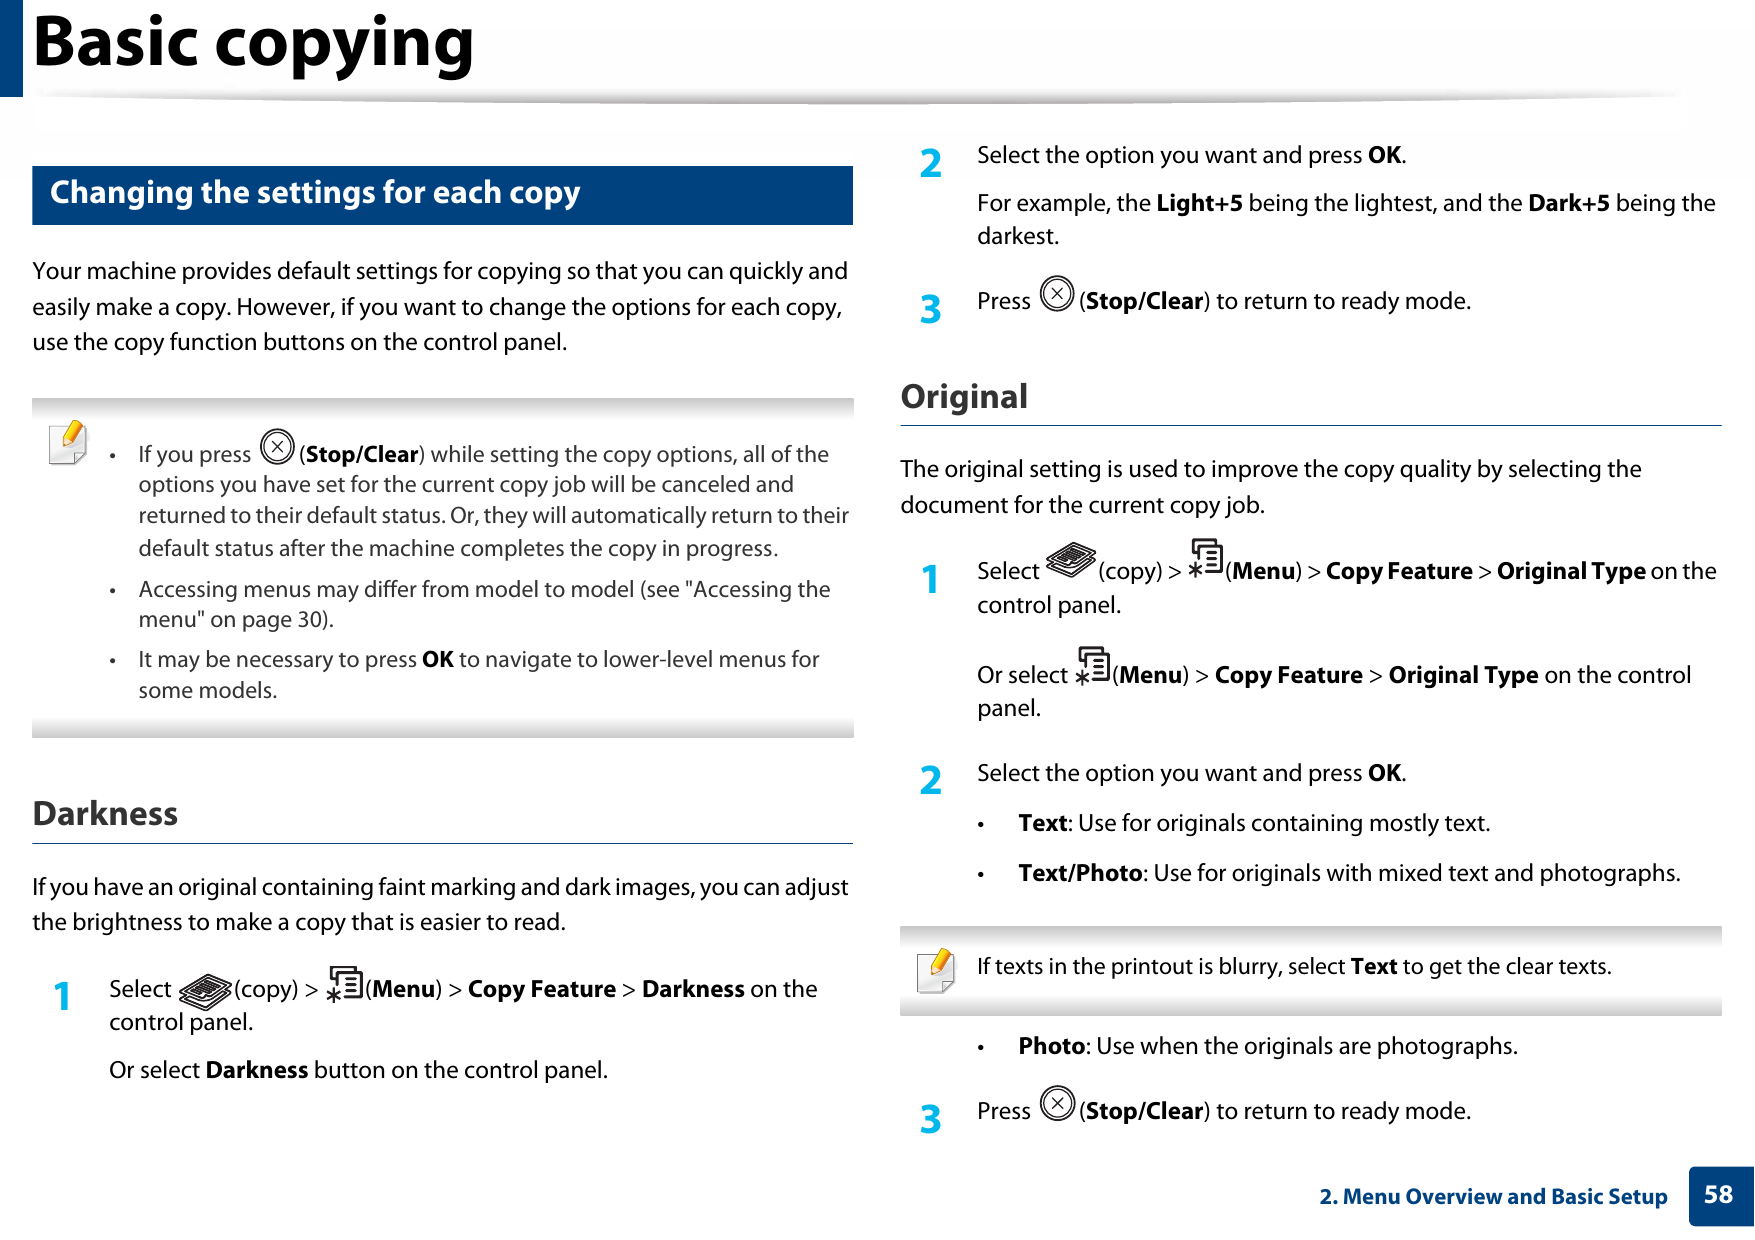 Basic copying582. Menu Overview and Basic Setup16 Changing the settings for each copyYour machine provides default settings for copying so that you can quickly and easily make a copy. However, if you want to change the options for each copy, use the copy function buttons on the control panel. •If you press  (Stop/Clear) while setting the copy options, all of the options you have set for the current copy job will be canceled and returned to their default status. Or, they will automatically return to their default status after the machine completes the copy in progress.• Accessing menus may differ from model to model (see &quot;Accessing the menu&quot; on page 30).• It may be necessary to press OK to navigate to lower-level menus for some models. DarknessIf you have an original containing faint marking and dark images, you can adjust the brightness to make a copy that is easier to read.1Select (copy) &gt; (Menu) &gt; Copy Feature &gt; Darkness on the control panel.Or select Darkness button on the control panel.2  Select the option you want and press OK.For example, the Light+5 being the lightest, and the Dark+5 being the darkest.3  Press (Stop/Clear) to return to ready mode.Original The original setting is used to improve the copy quality by selecting the document for the current copy job.1Select (copy) &gt; (Menu) &gt; Copy Feature &gt; Original Type on the control panel.Or select  (Menu) &gt; Copy Feature &gt; Original Type on the control panel.2  Select the option you want and press OK.•Text: Use for originals containing mostly text.•Text/Photo: Use for originals with mixed text and photographs. If texts in the printout is blurry, select Text to get the clear texts. •Photo: Use when the originals are photographs.3  Press (Stop/Clear) to return to ready mode.